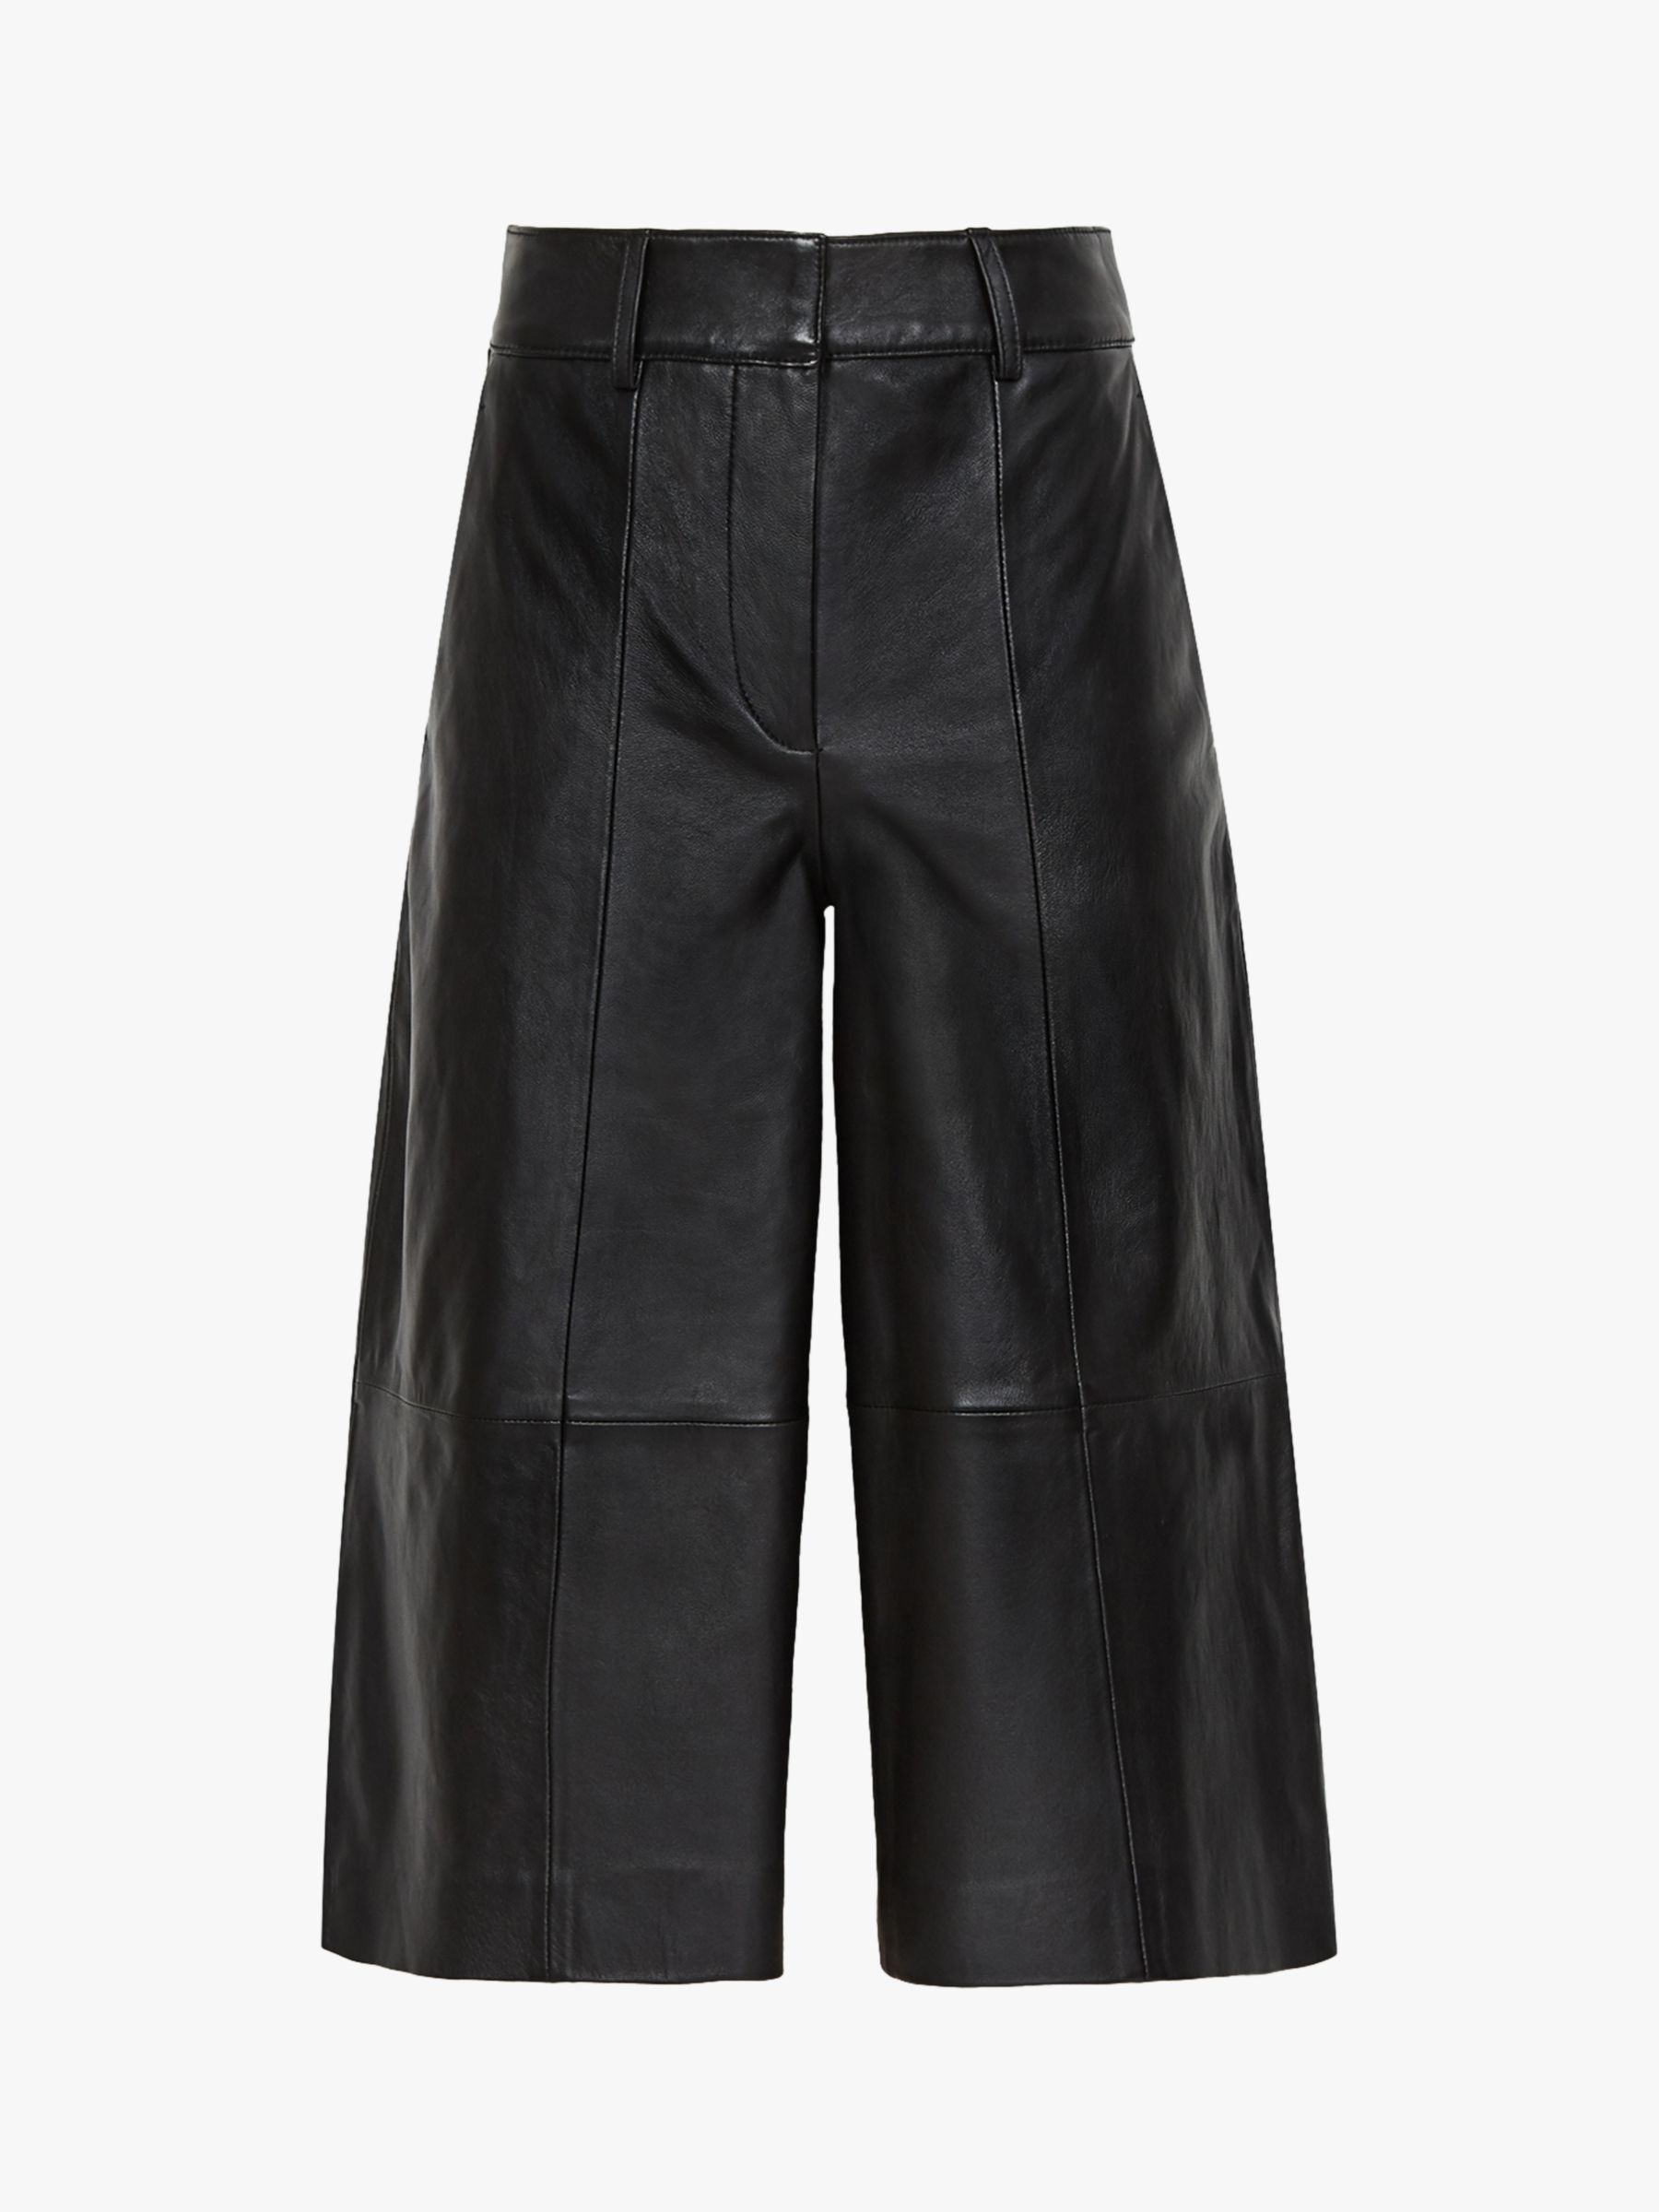 Reiss Lotte Leather Cropped Culottes, Black